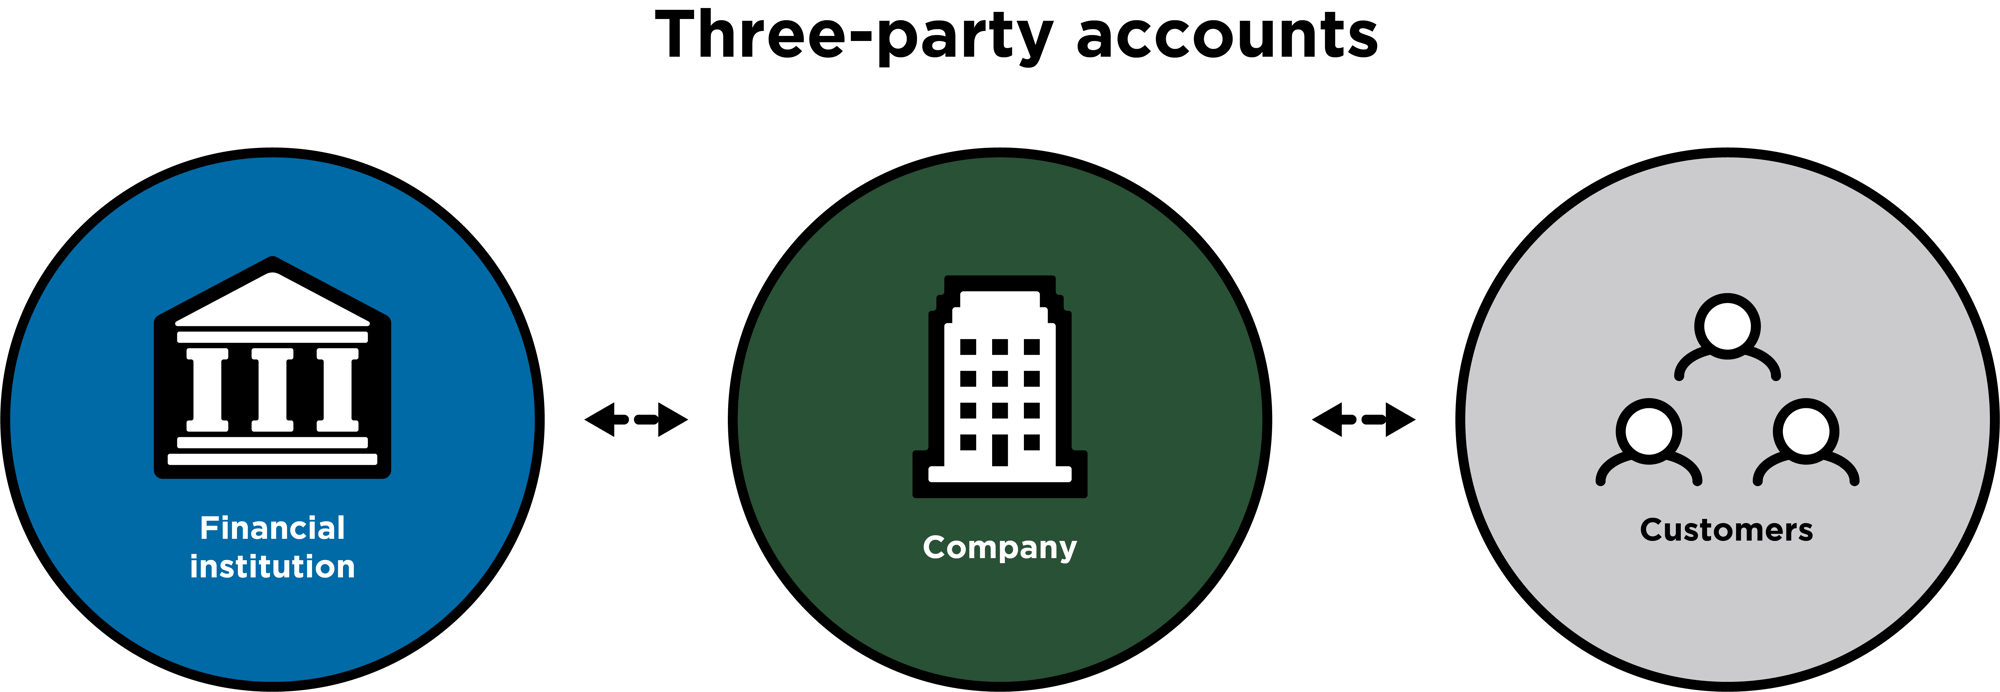 ZSuite_Infographic_3Party Updated